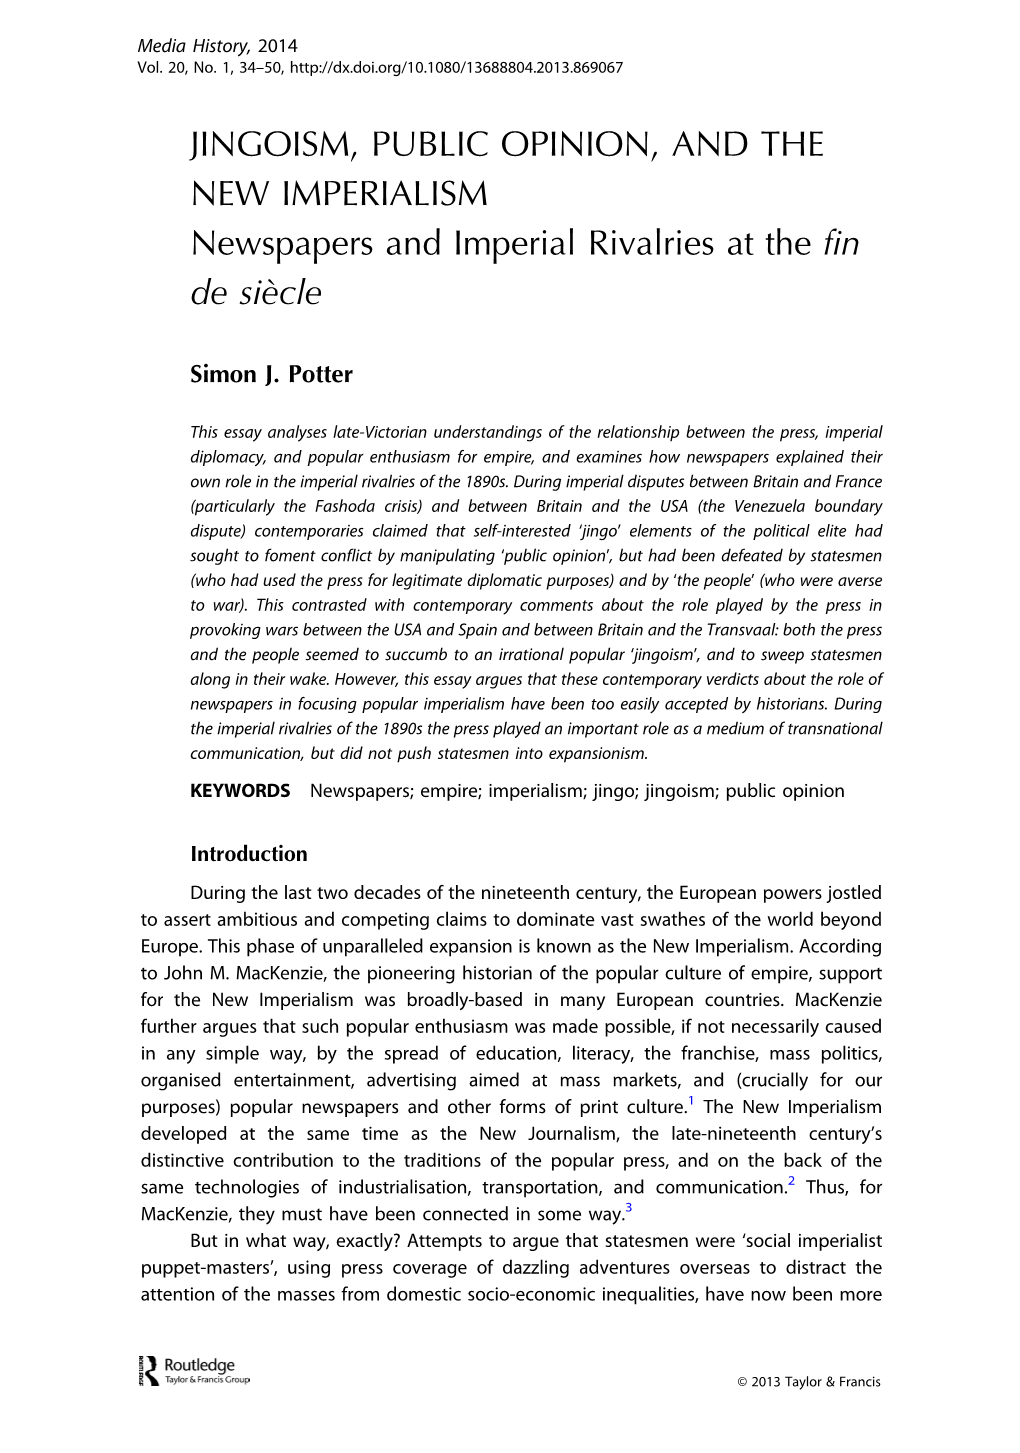 JINGOISM, PUBLIC OPINION, and the NEW IMPERIALISM Newspapers and Imperial Rivalries at the Fin De Siècle